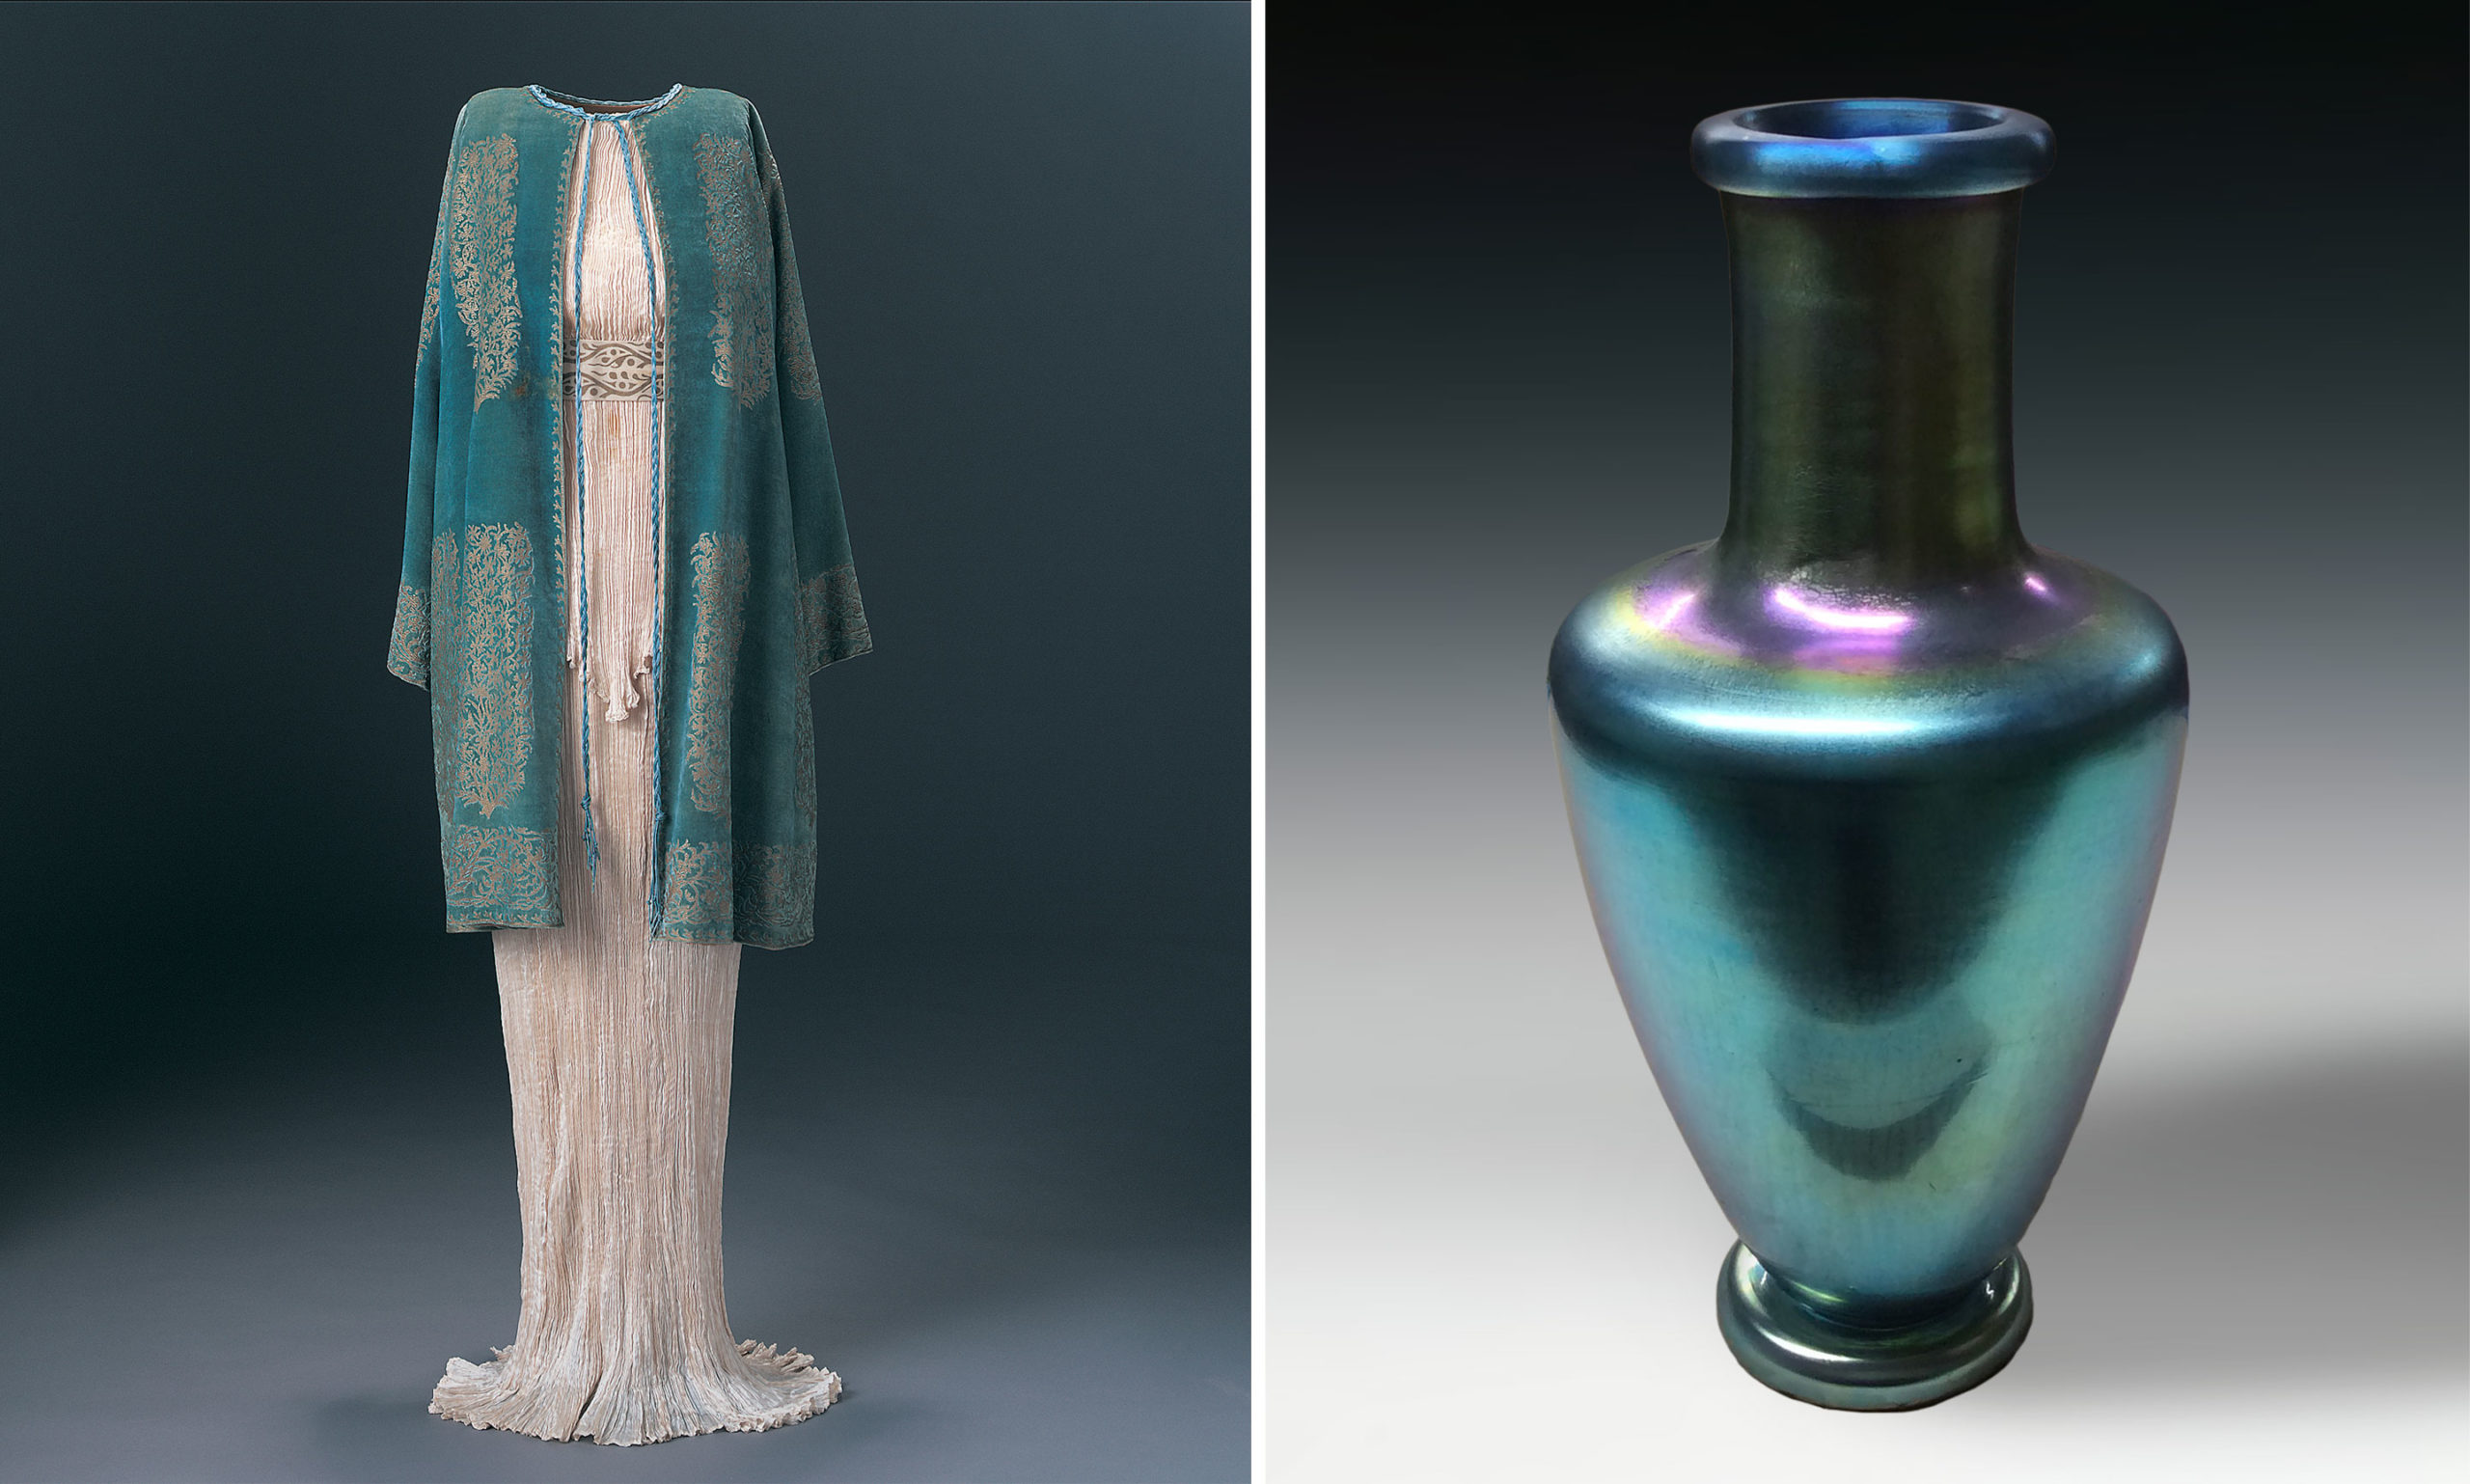 Mariano Fortuny y Madrazo, Blue velvet coat with gold stenciled painted design (Abrigo de terciopelo azul con diseño pintado en oro), 1934. Silk velvet stenciled with metals. Collection of Phoenix Art Museum. Gift of Mrs. Anne Robinson; Tiffany and Company, Favril Vase, 1921. Glass. Collection of Phoenix Art Museum. Gift of Edward Jacobson.